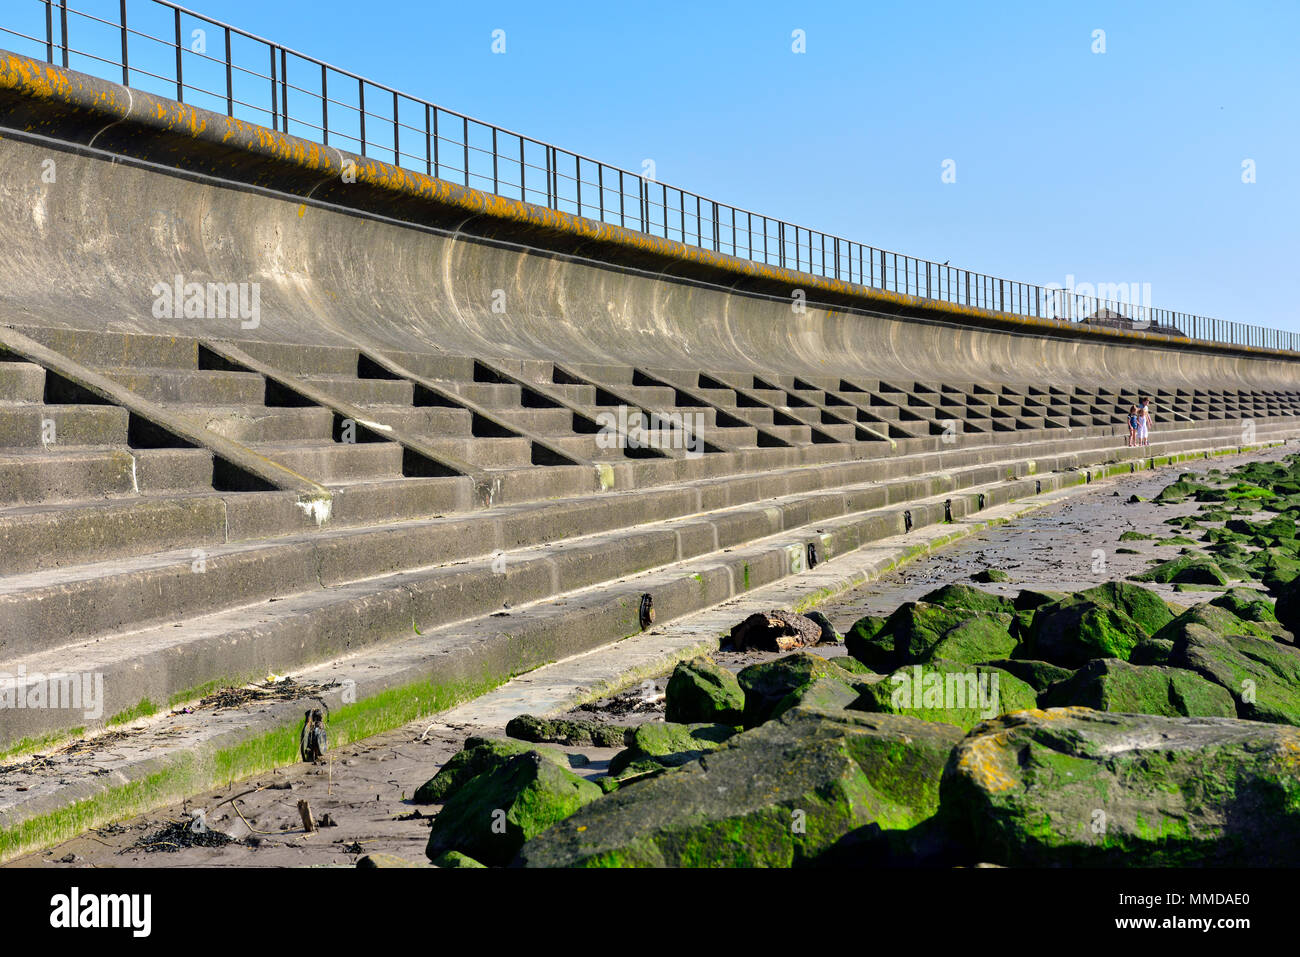 Low tide showing concrete sea defence against high tide along Severn Estuary at Severn Beach, UK Stock Photo